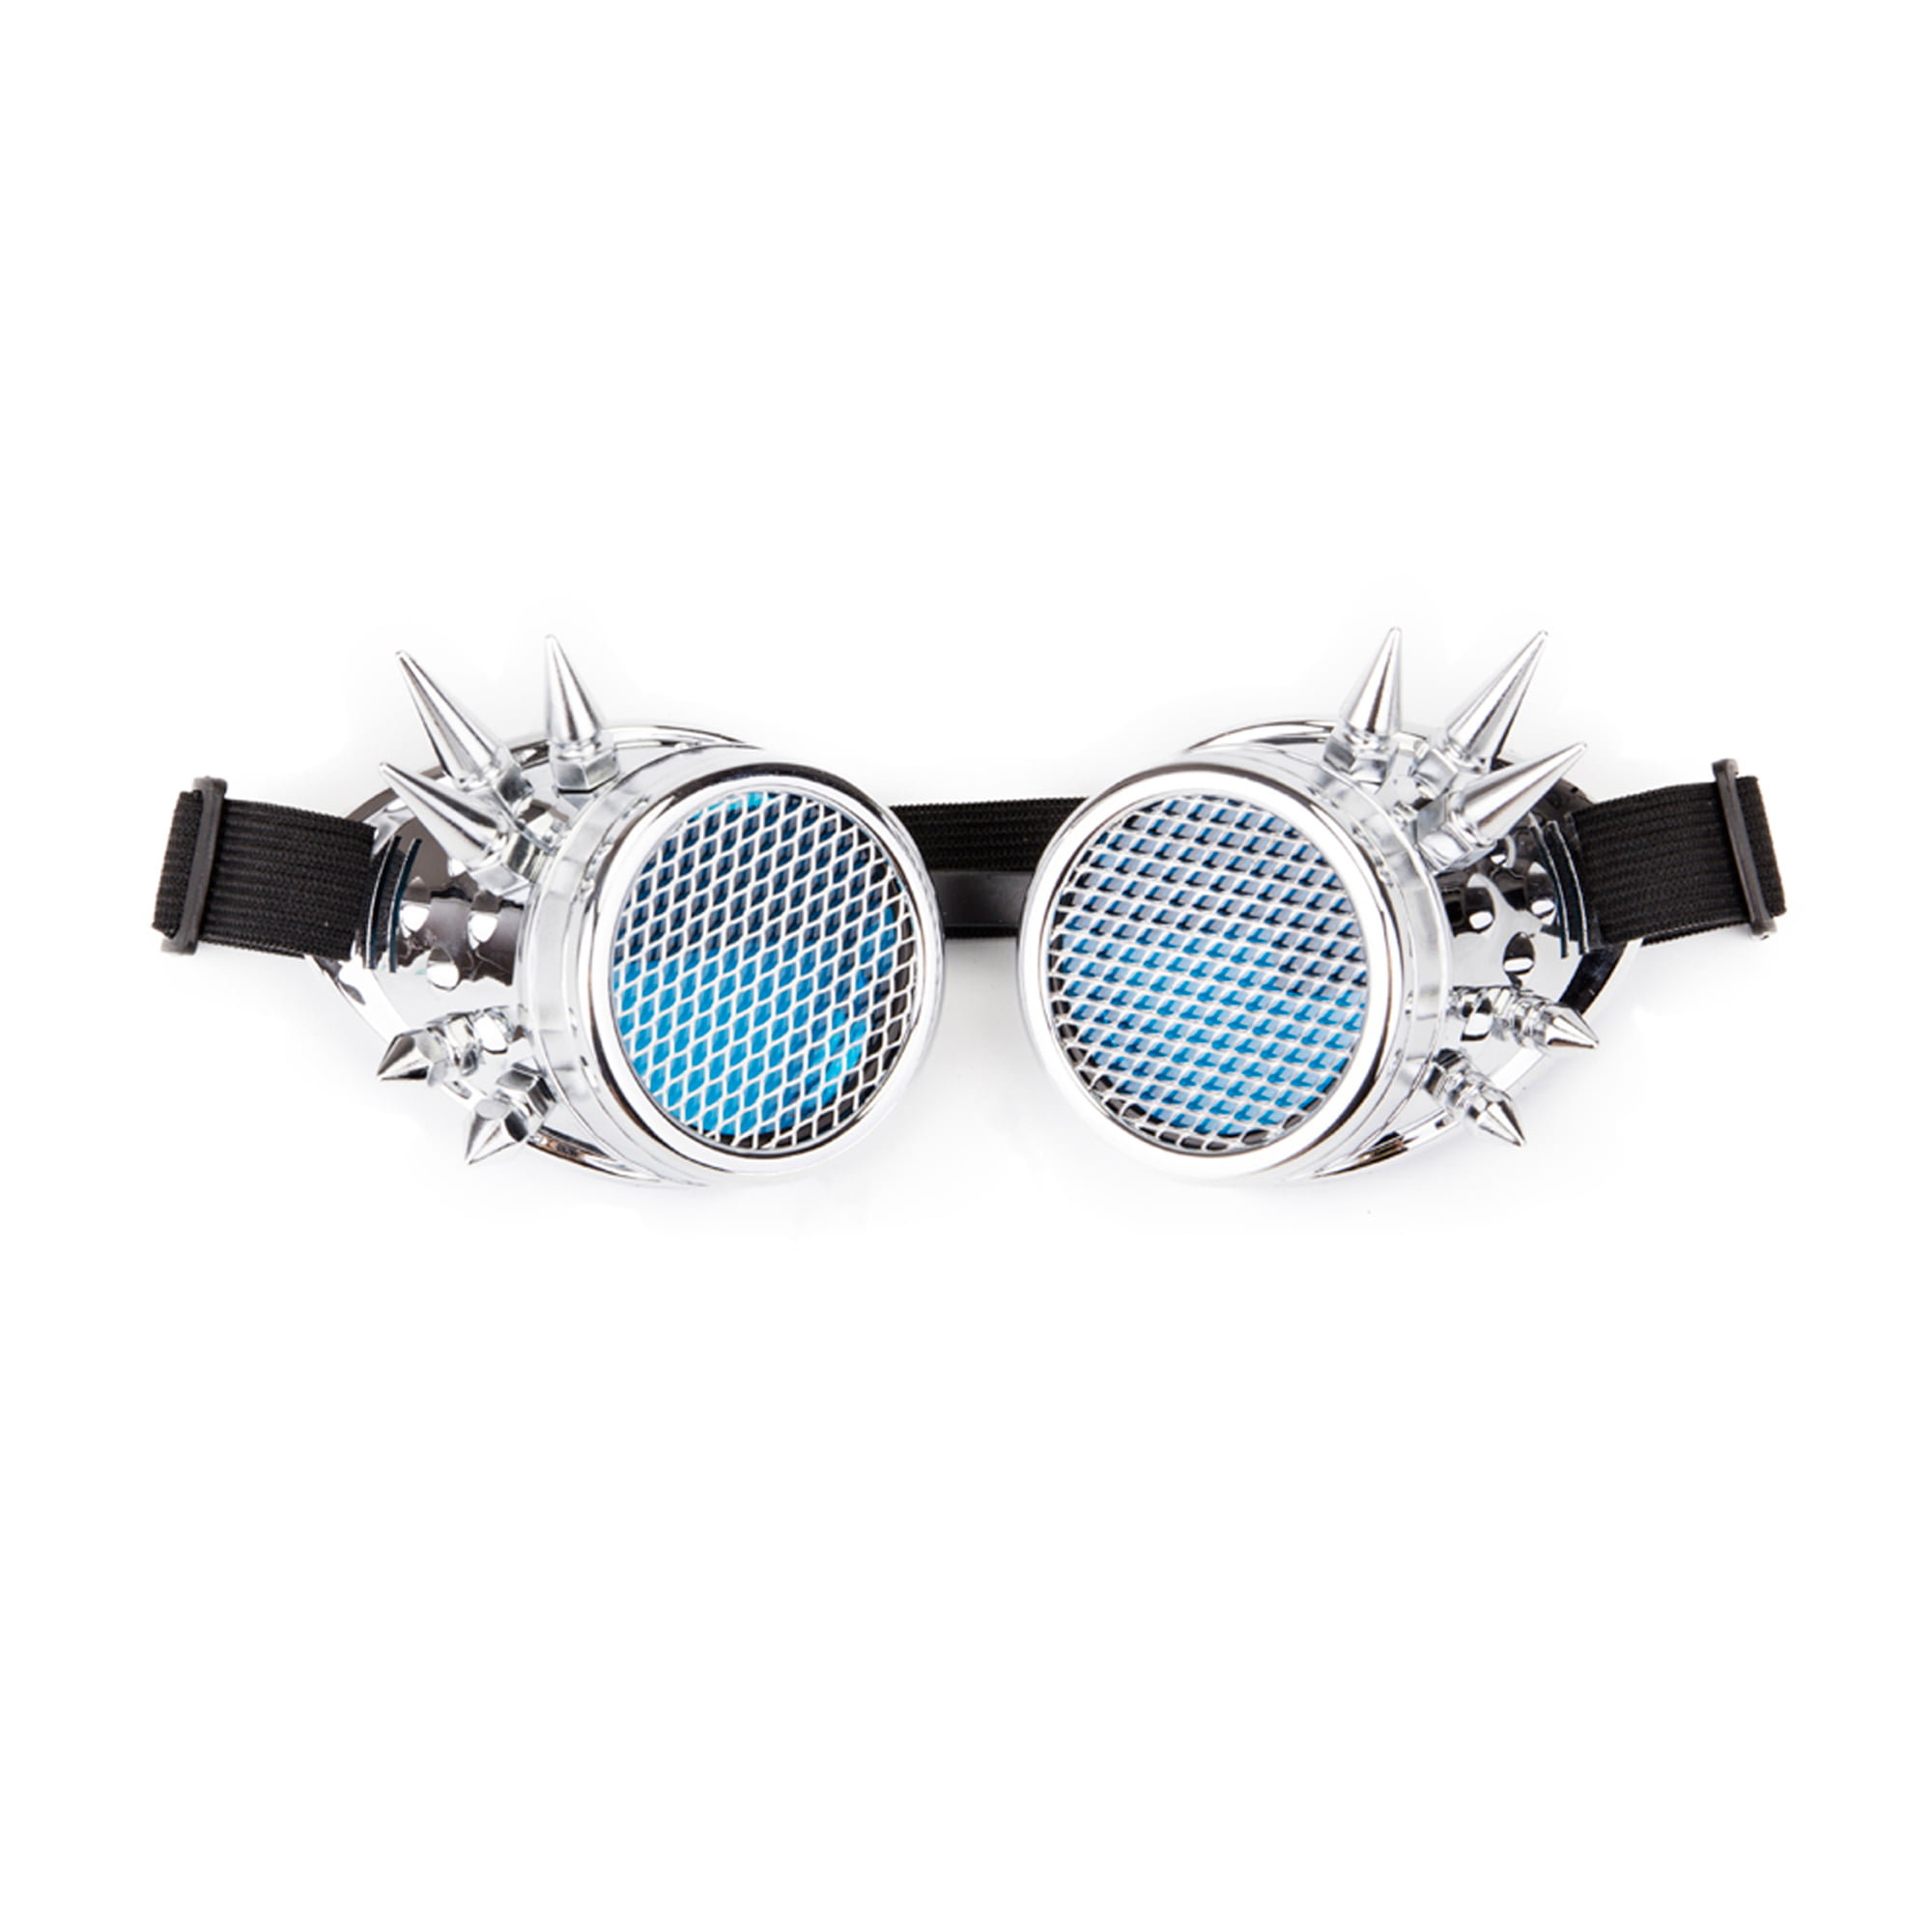 Lelinta Steampunk Kaleidoscope Goggles Rainbow or Barbed Wire Lens With Lights